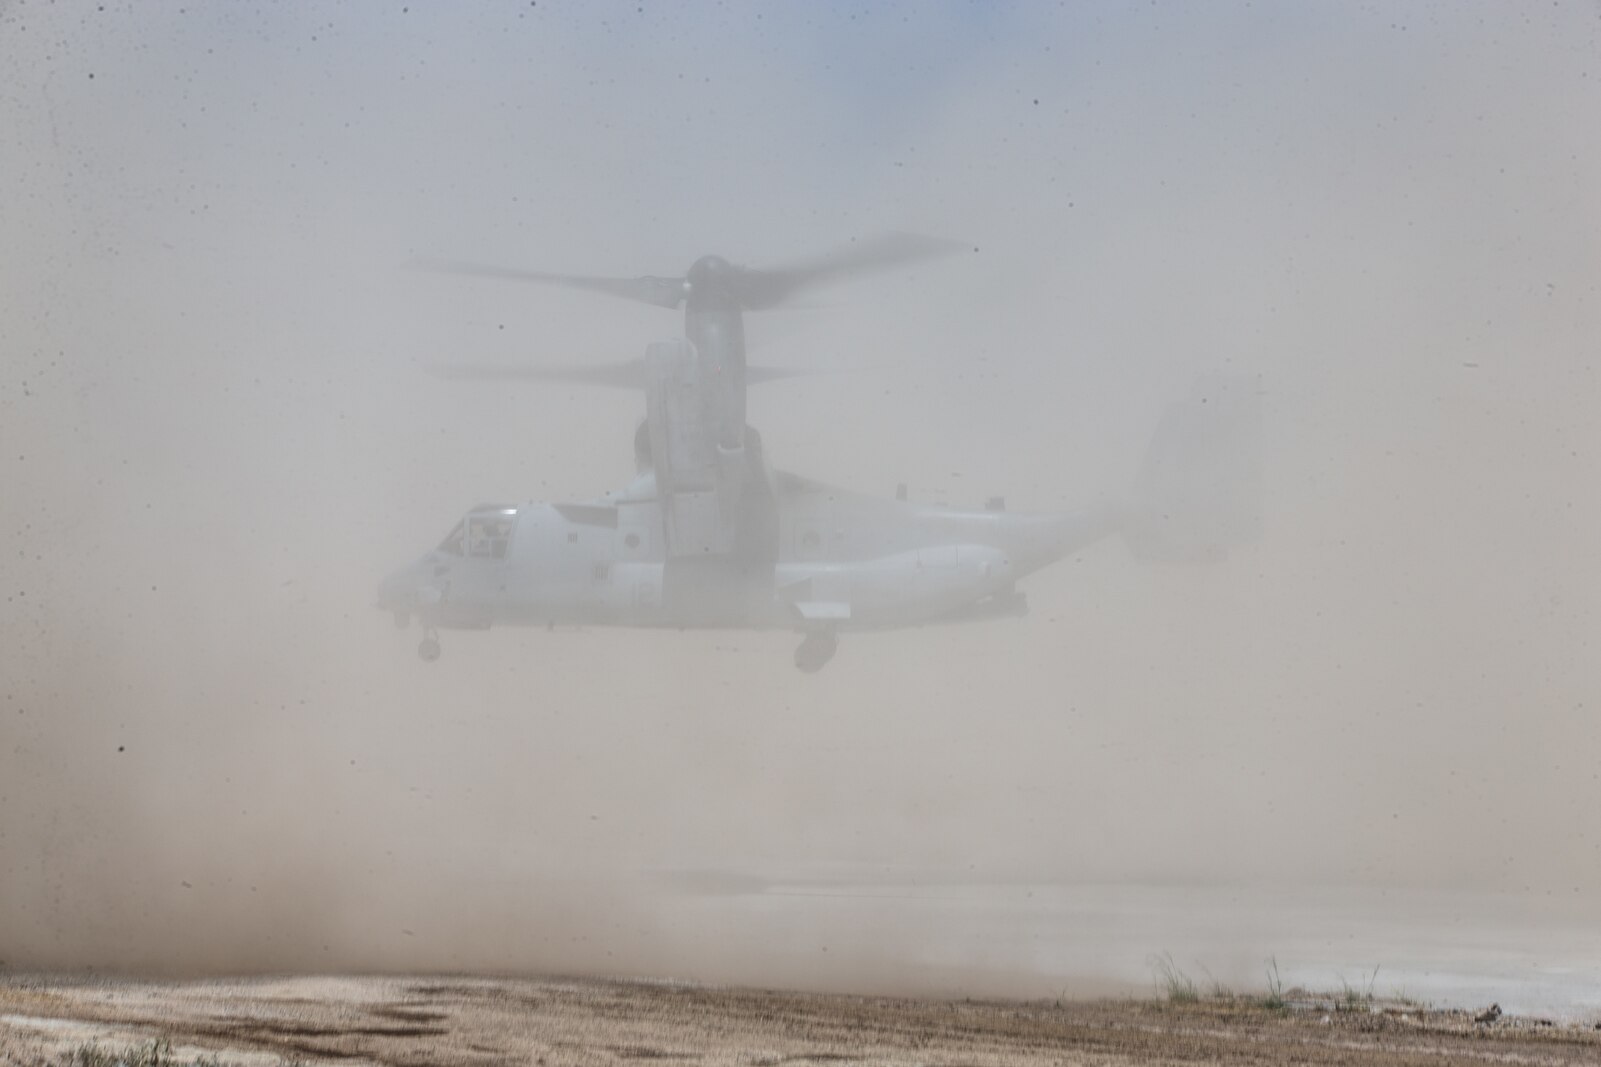 The MV-22B Osprey demonstrates the Marine Corps’ self-sufficiency in austere environments!